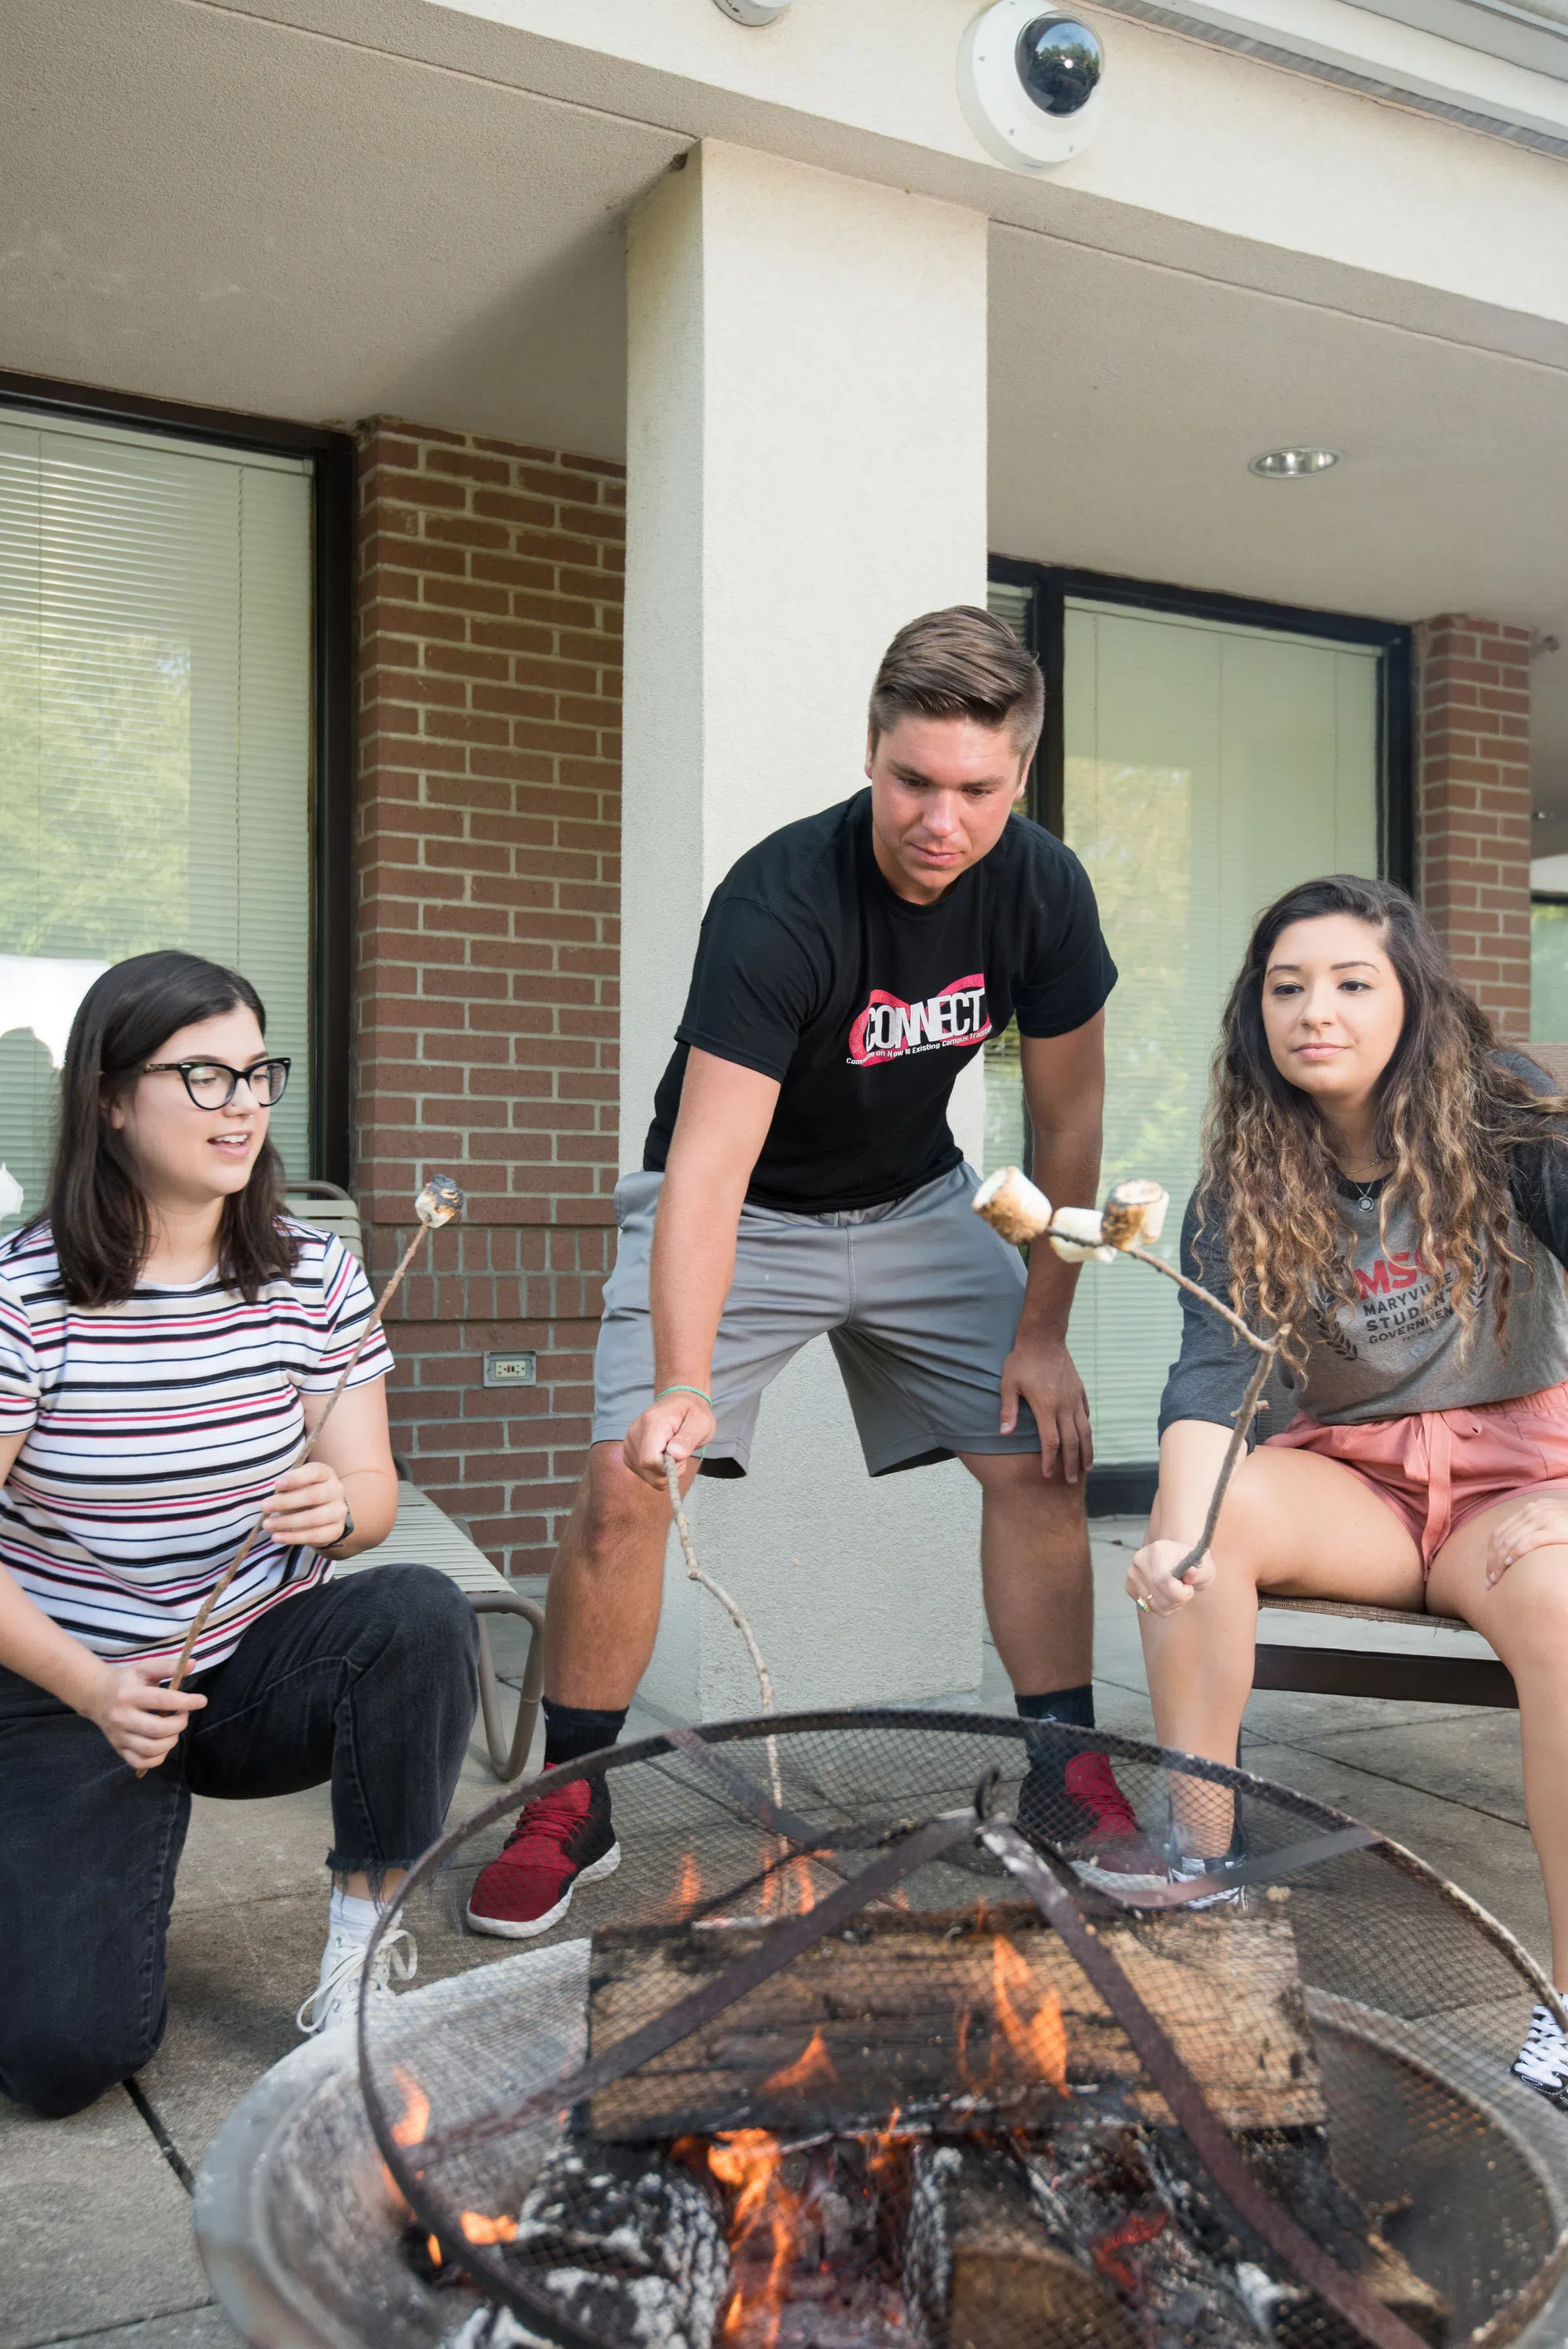 Students roast marshmallows at a firepit in the Potter Hall courtyard.